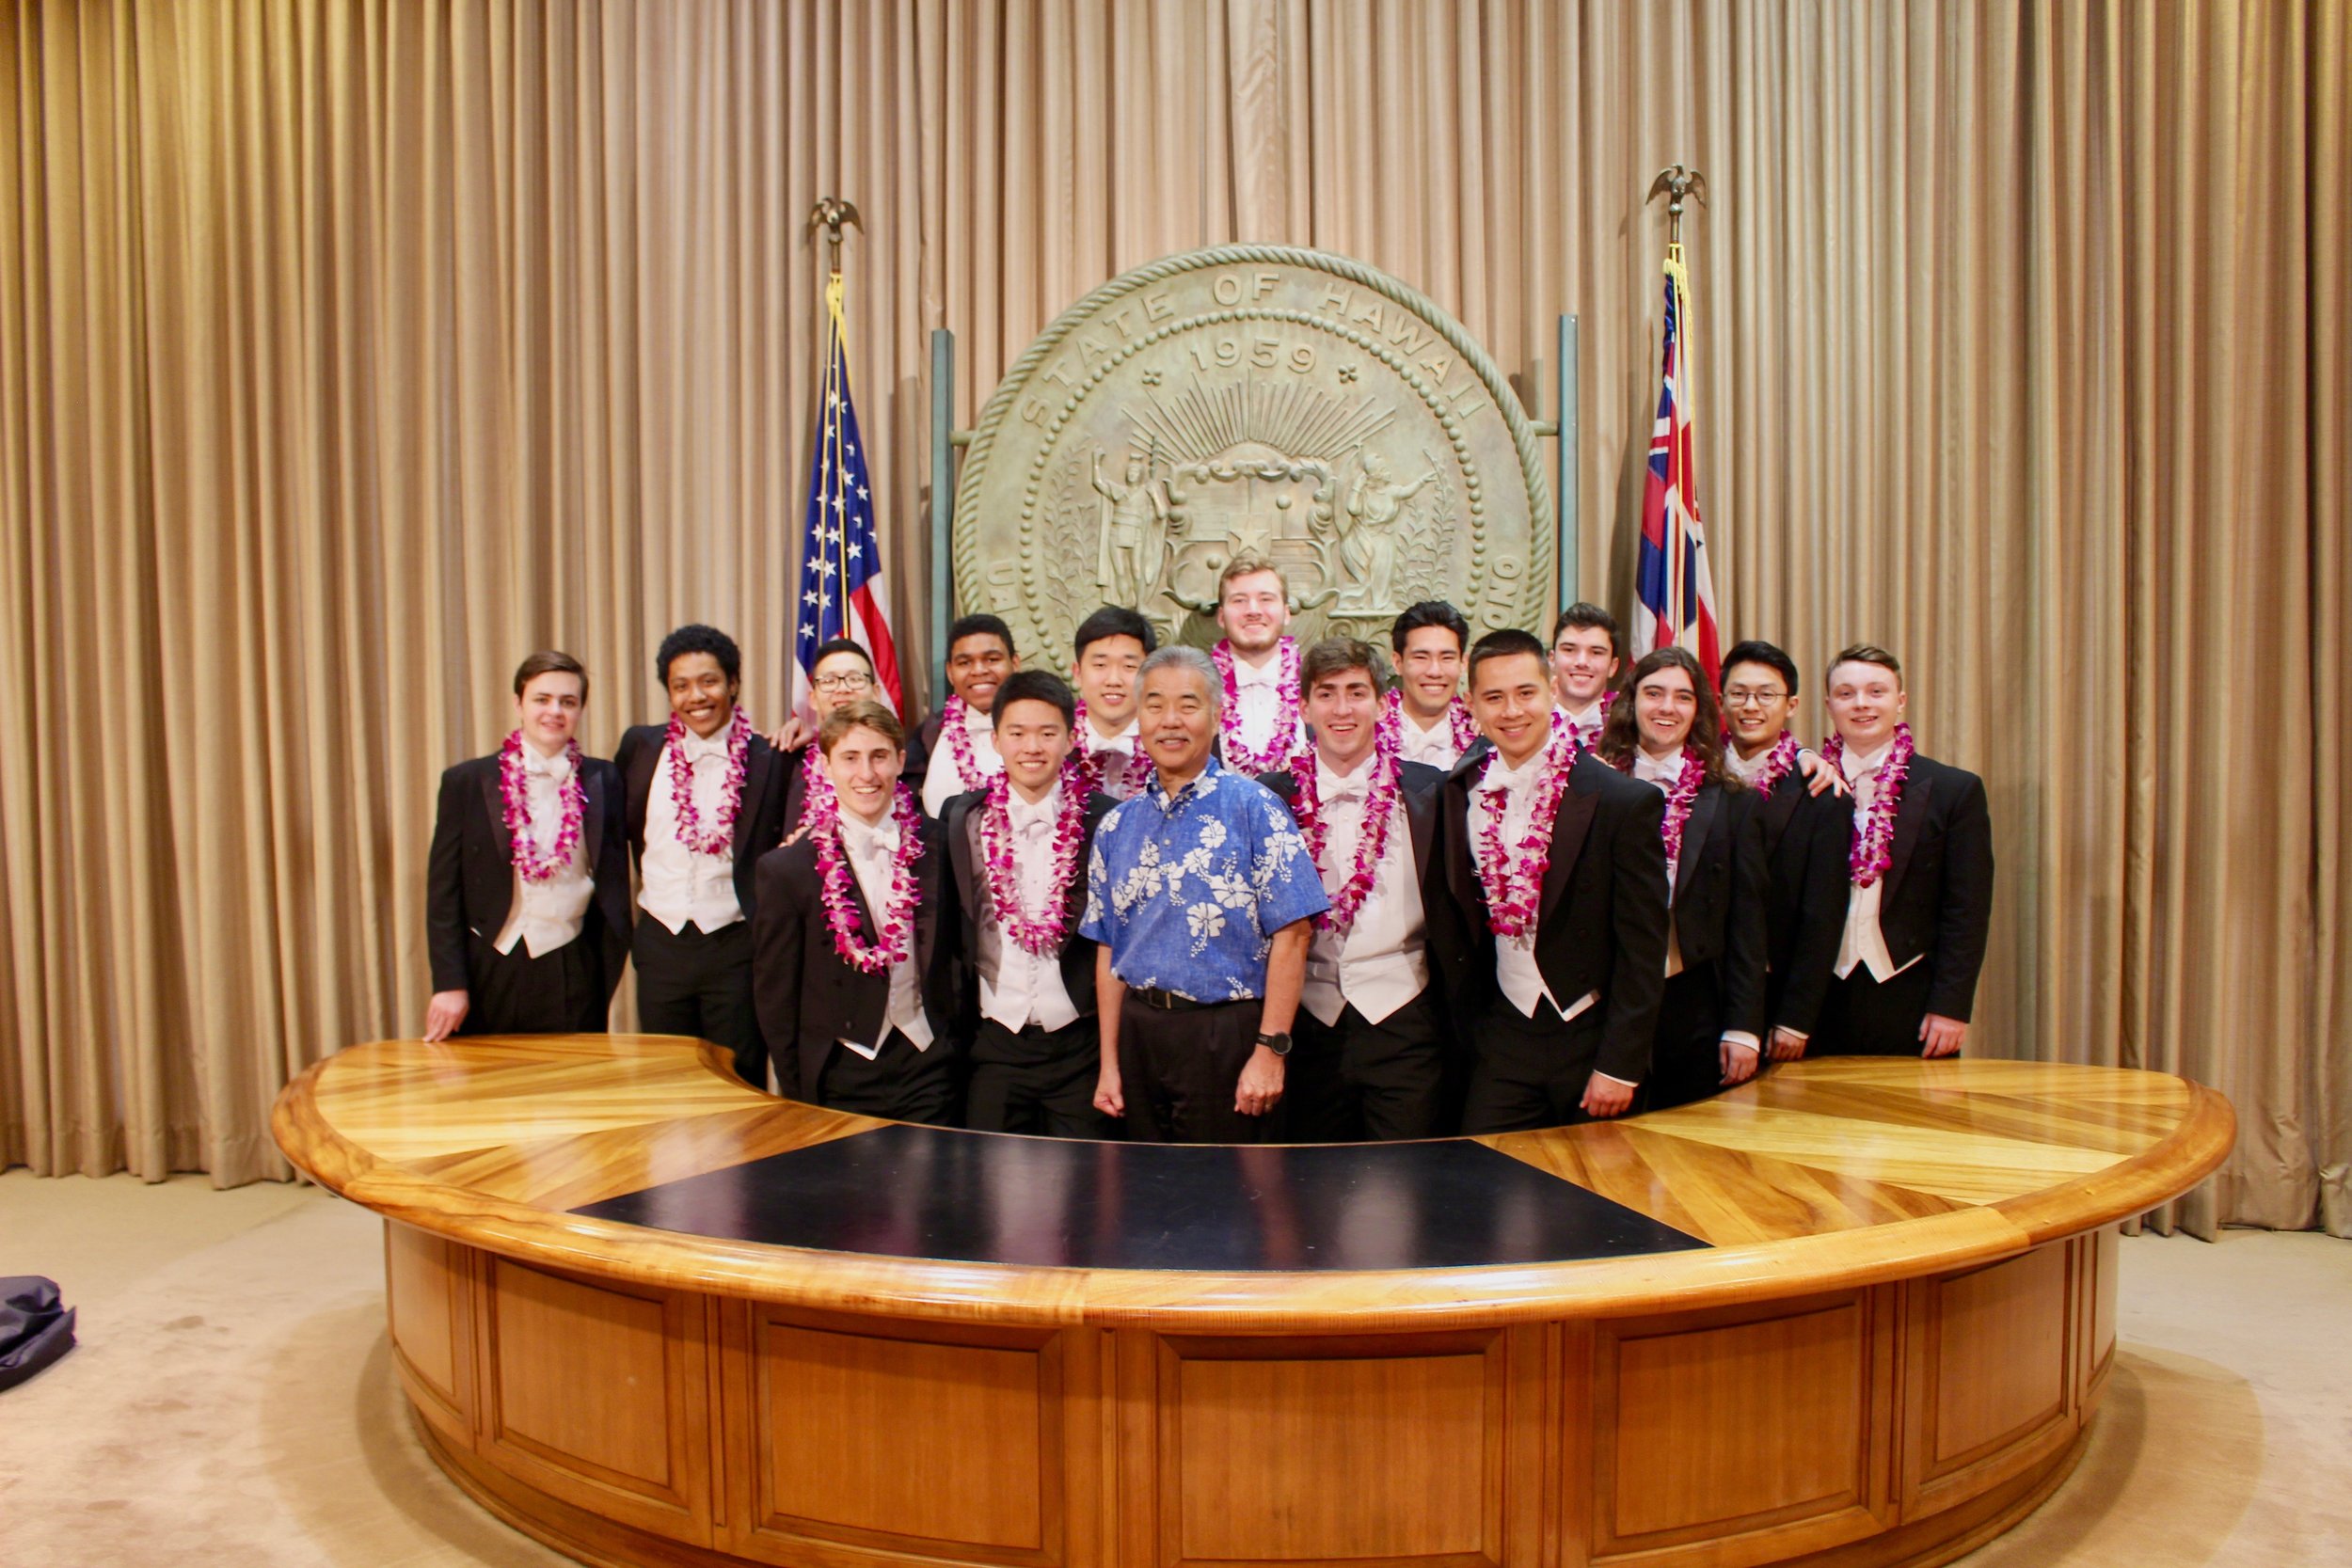  Performing for the Governor of Hawaii on State “Yale Alley Cats Day”! 